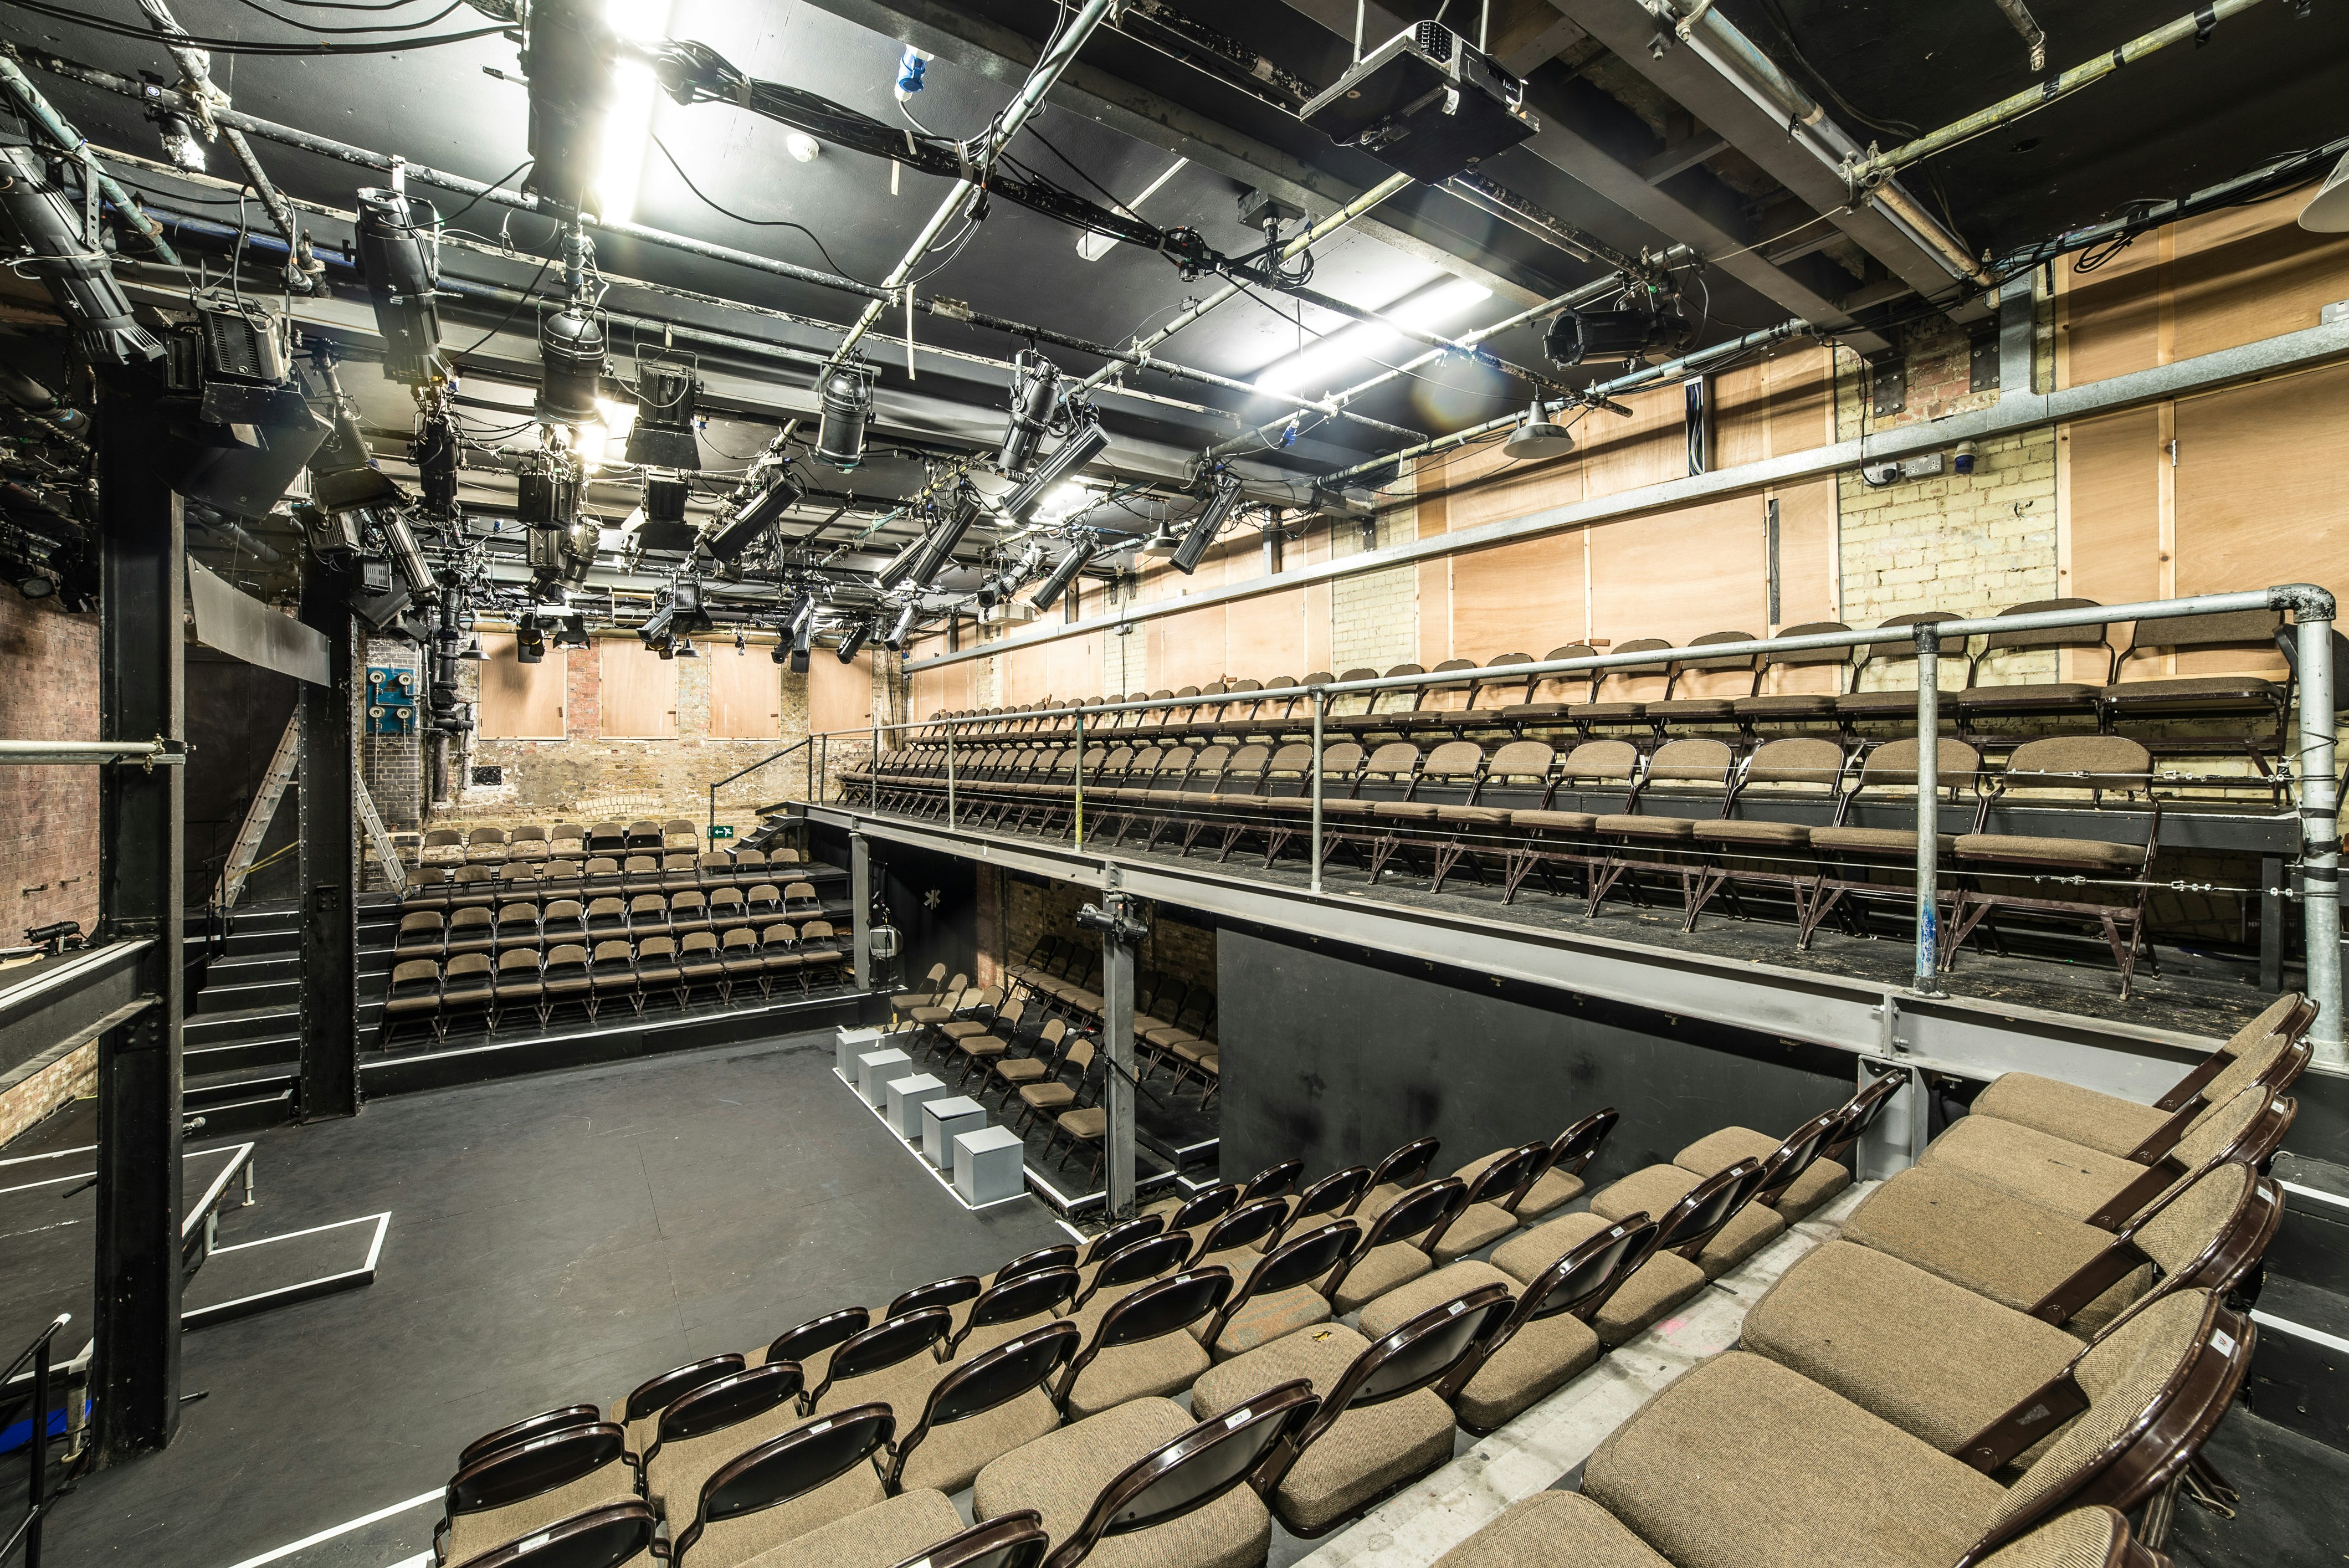 Away Day Venues in East London - Arcola Theatre & Bar